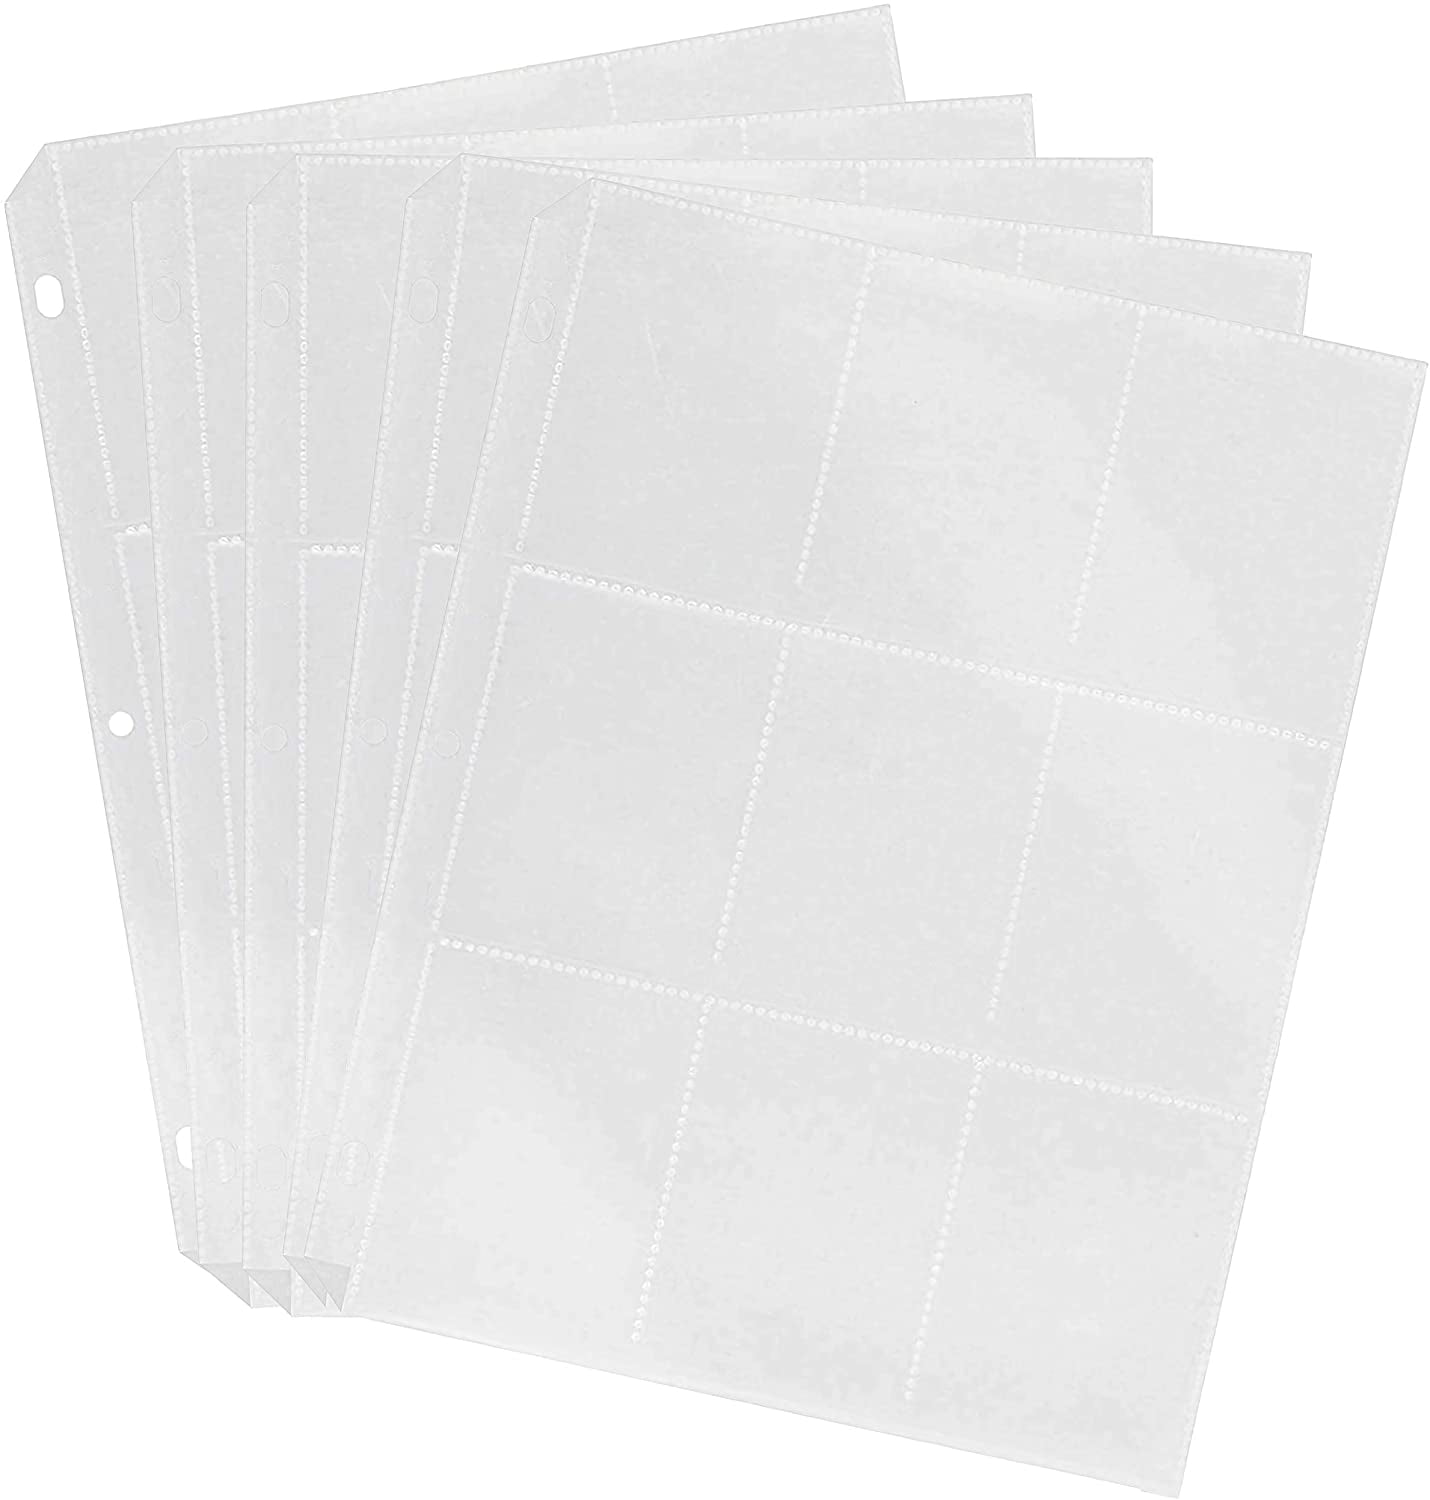 Plastic Card Holder 50Sheets Card Sleeves with 9 Pockets for Trading Cards SY 